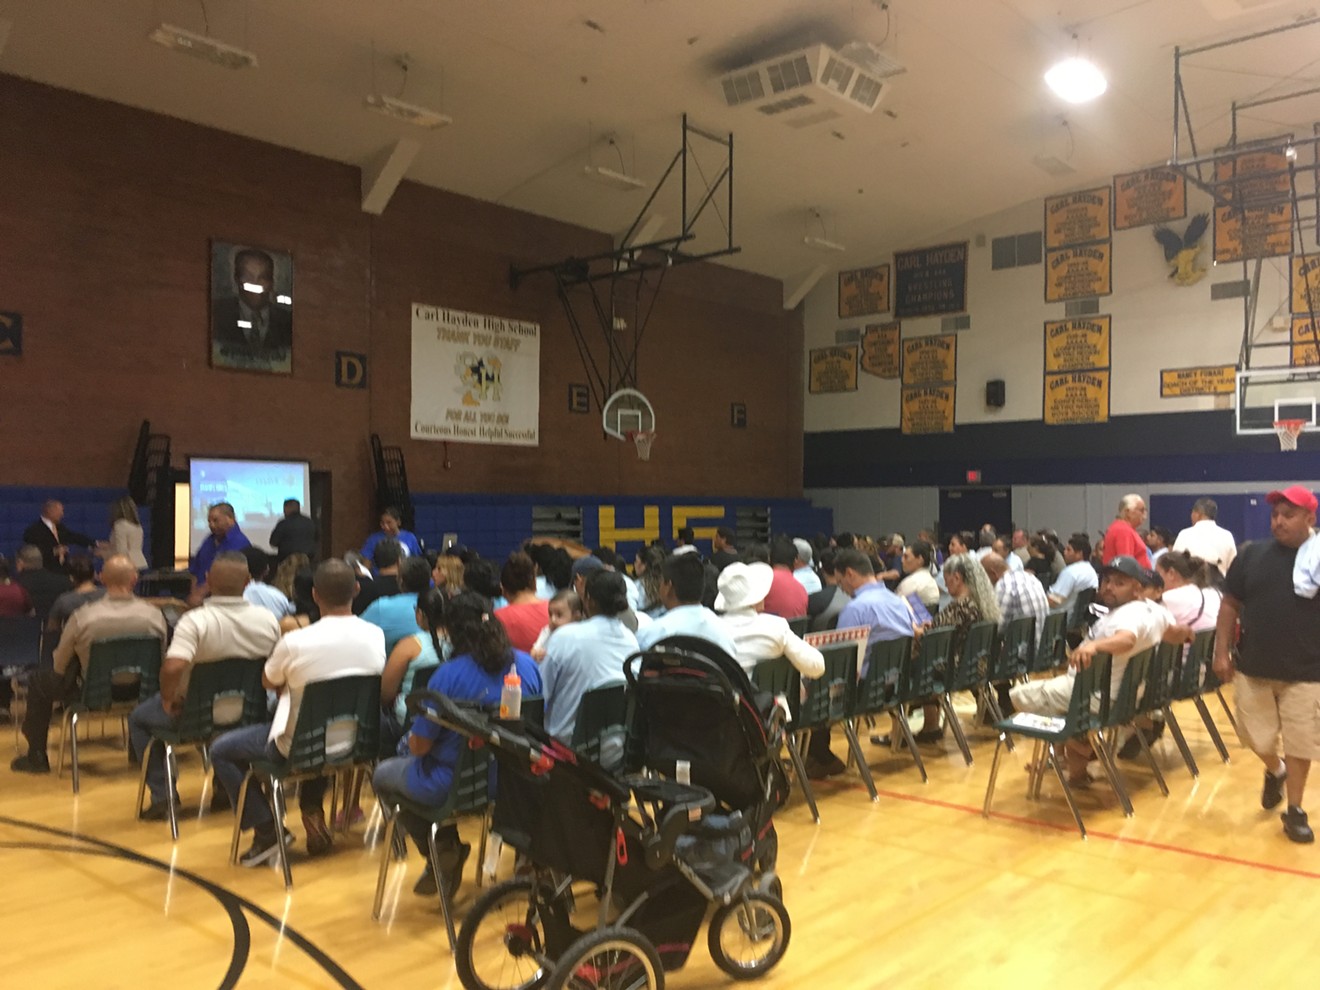 The Maricopa County Sheriff's Office hosted a community forum to hear comments and complaints from citizens. It was a full house.